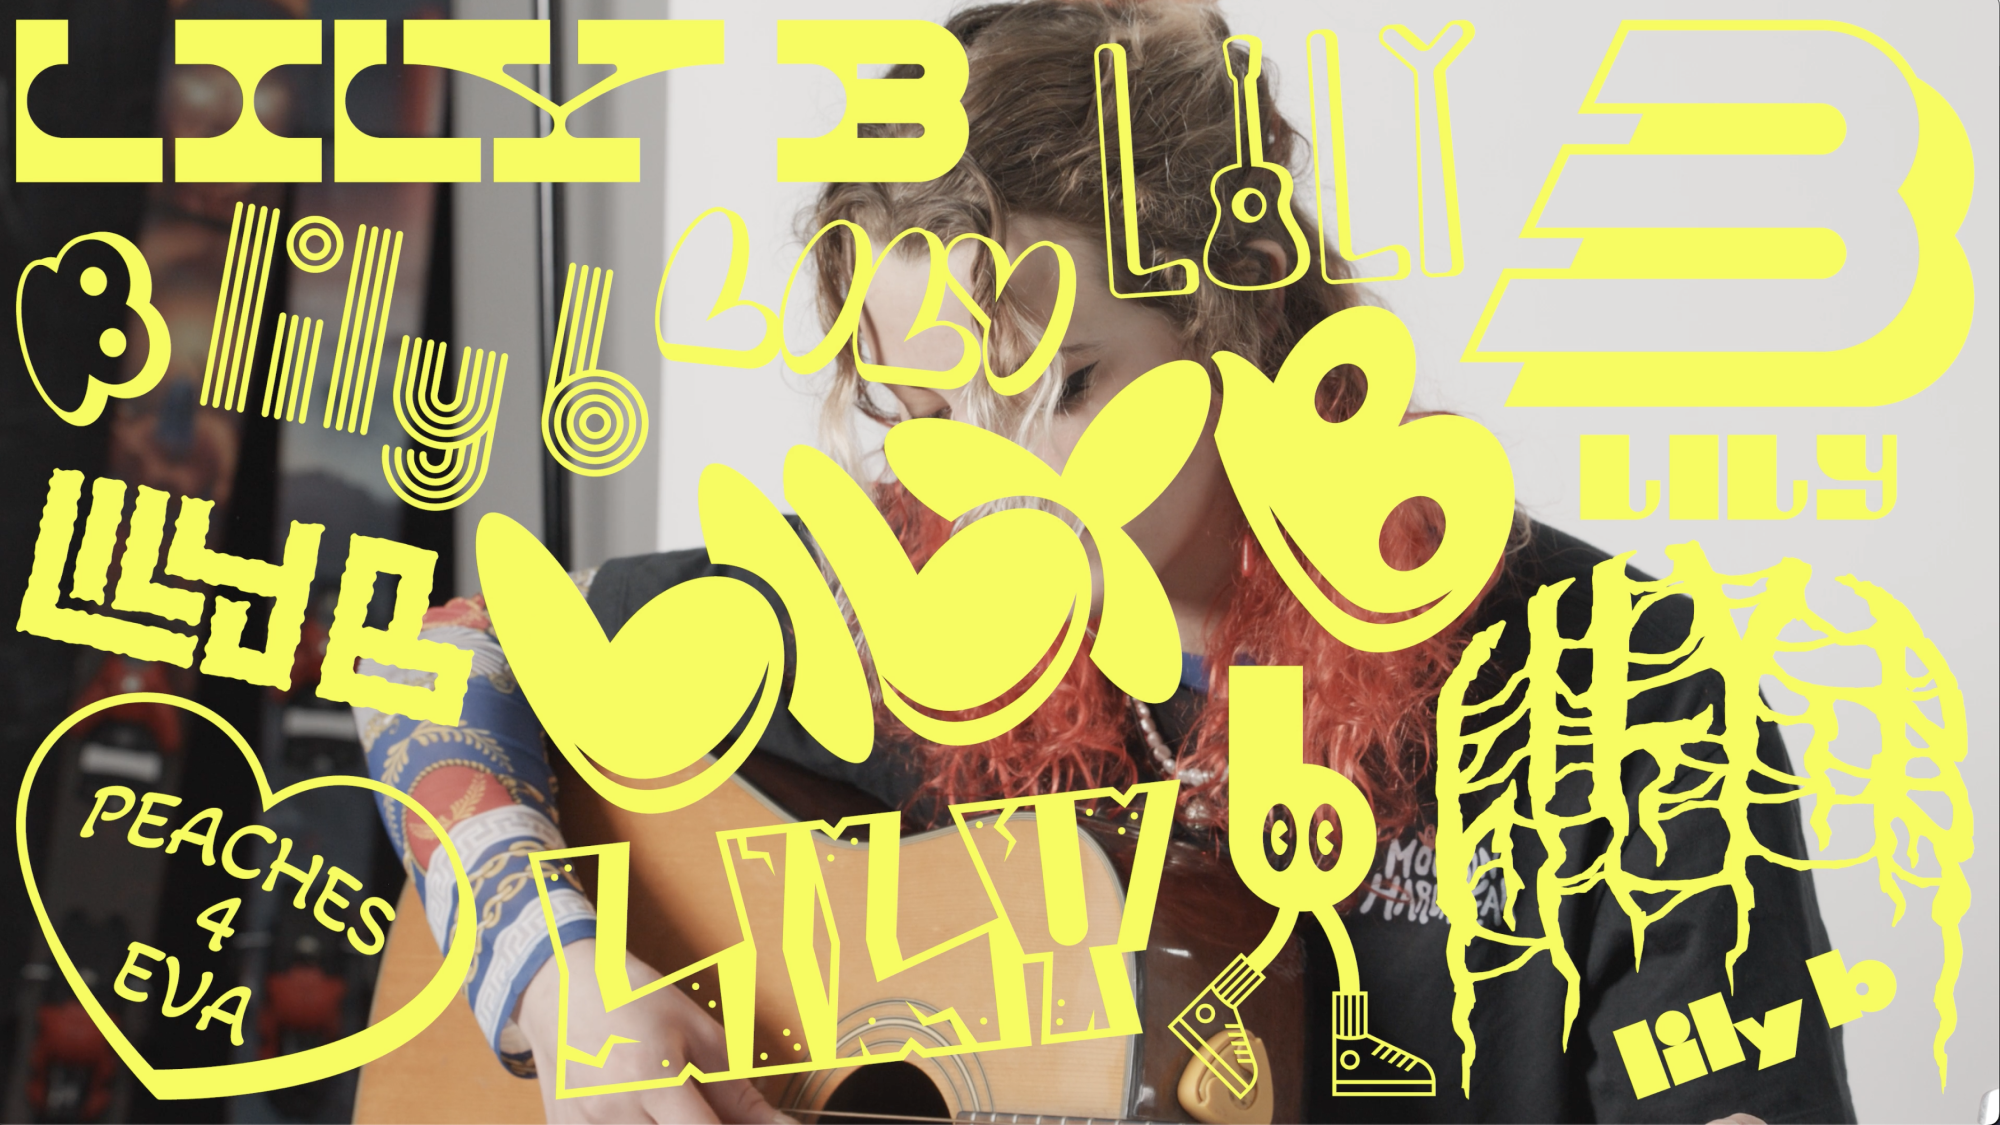 'Lily B' & 'Liy" are written all over an image of MHW athlete Lily Bradley in different lettering and script in yellow.